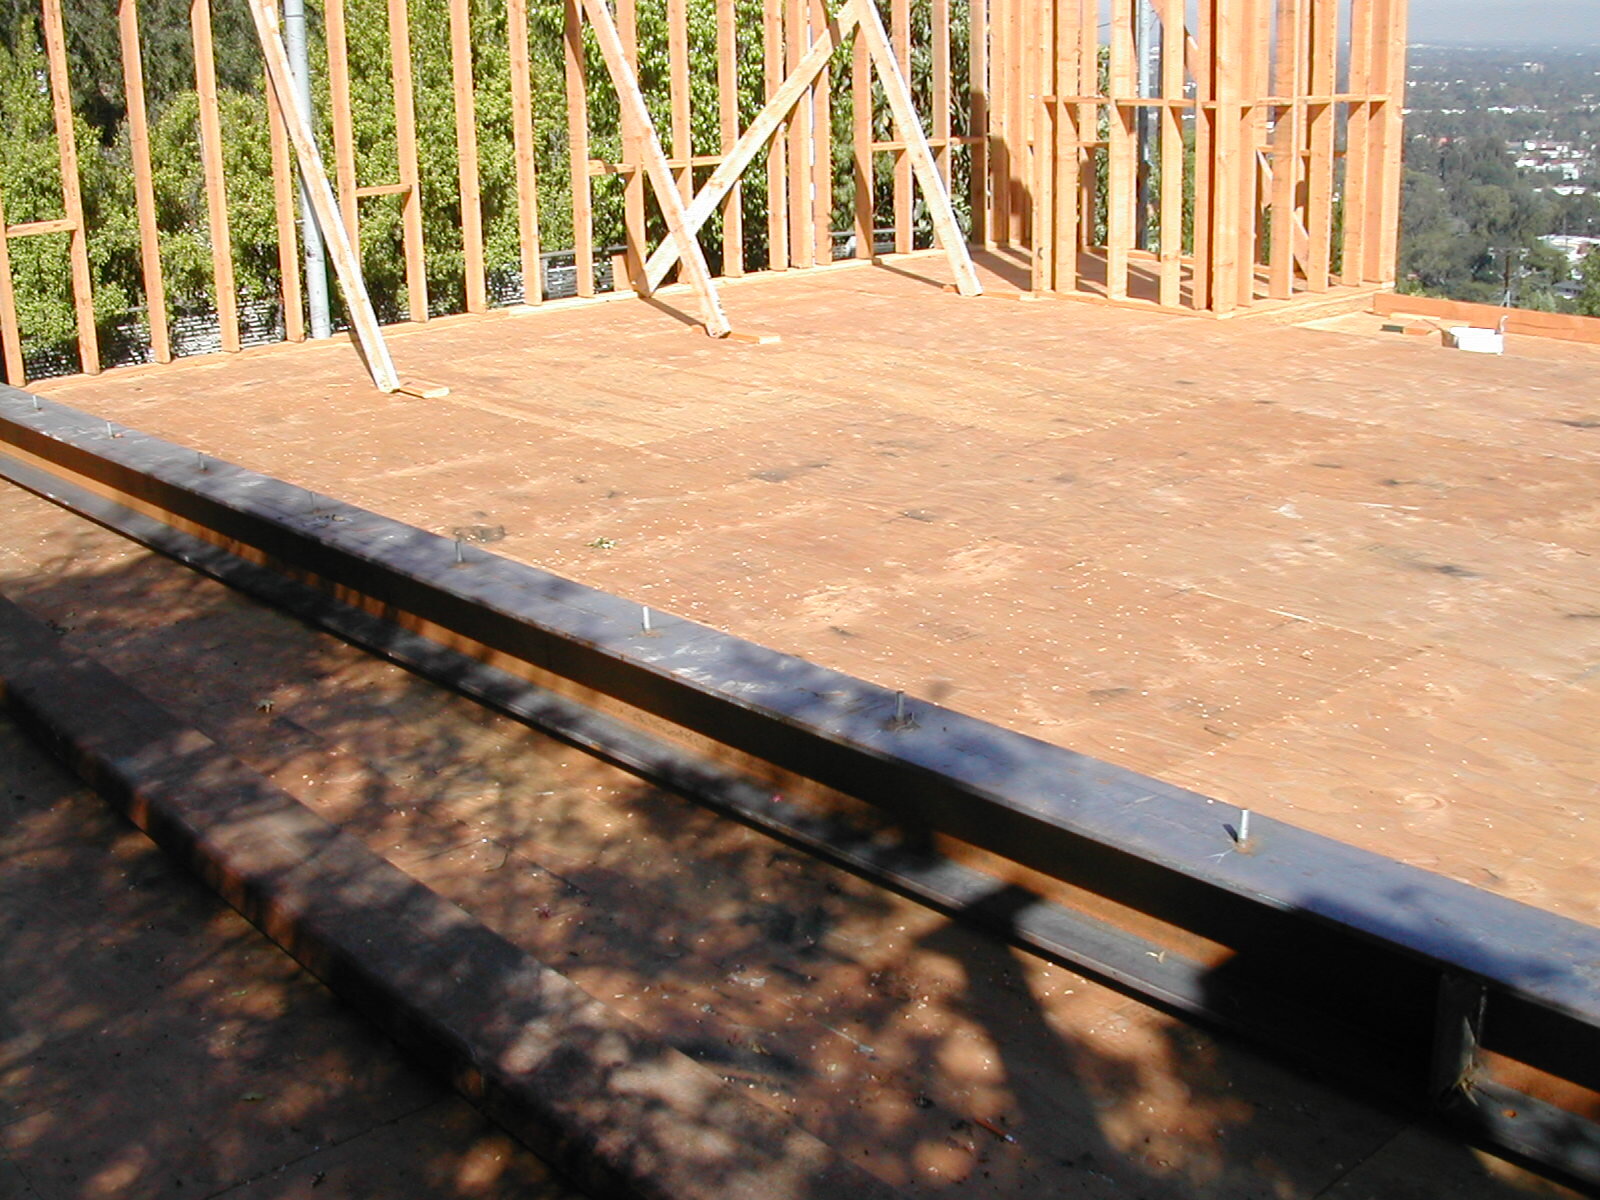  A steel beam sitting on the second story floor, awaiting installation. Generally, I am not inclined to run a job sequentially by completing one phase and then moving to the next. Although some subcontractors disagree with this view, I find it more p